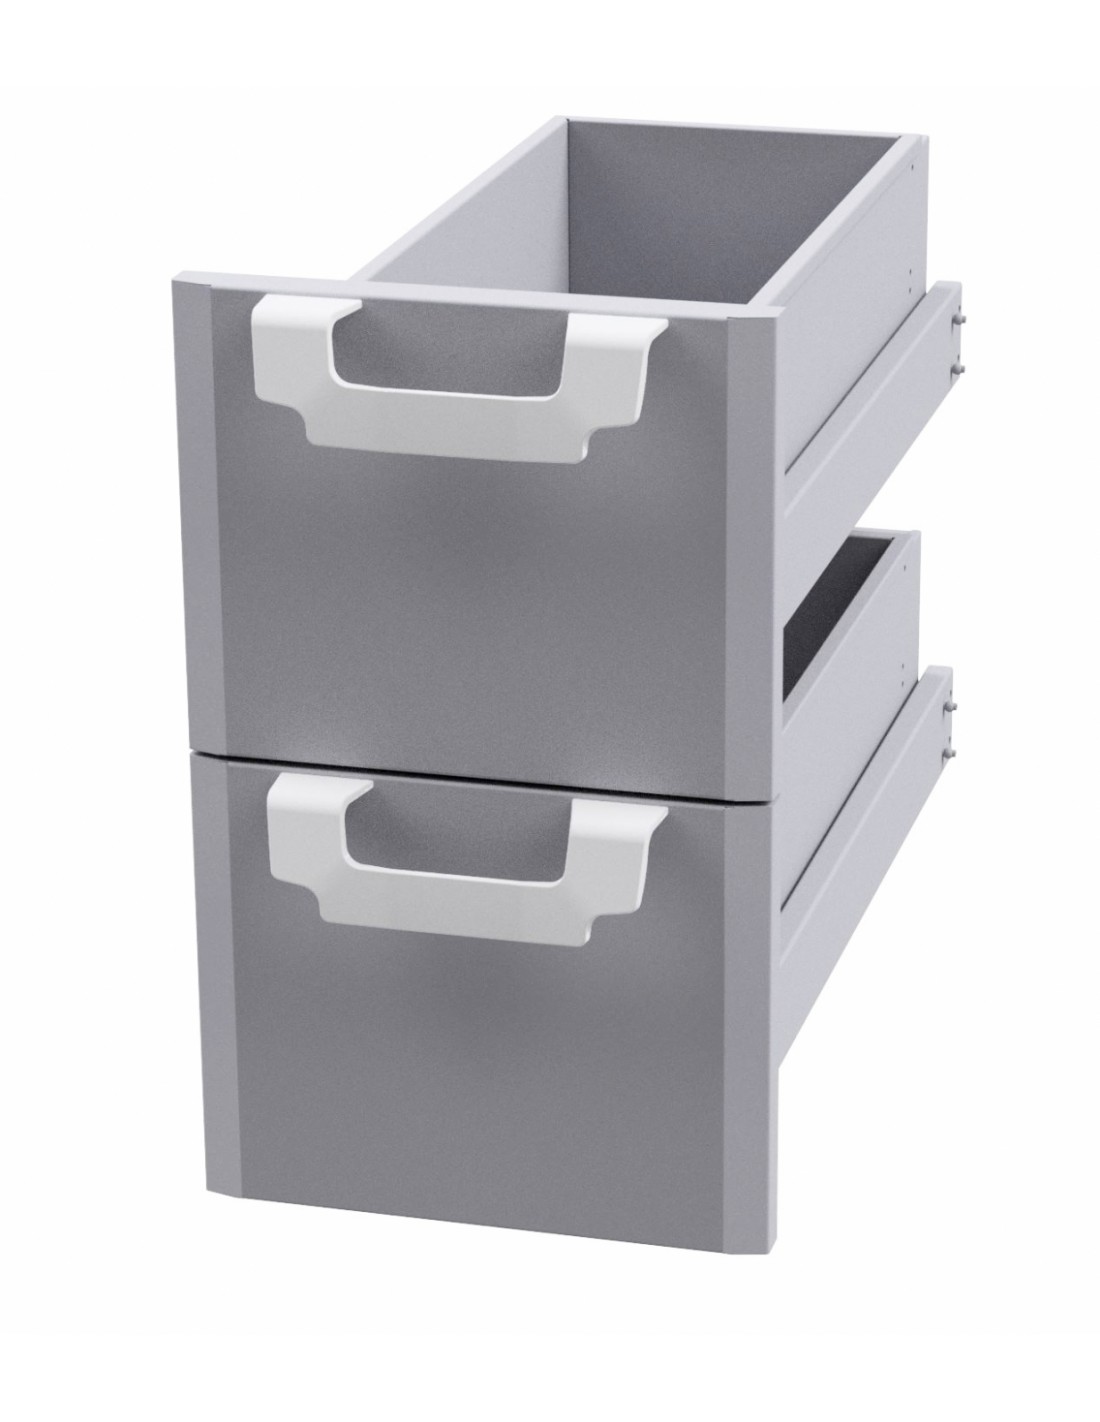 Cassettiera 300/400/600 - N. 2 drawers with stainless steel tub telescopic guides - Dimensions cm. 39,5x 51x 47